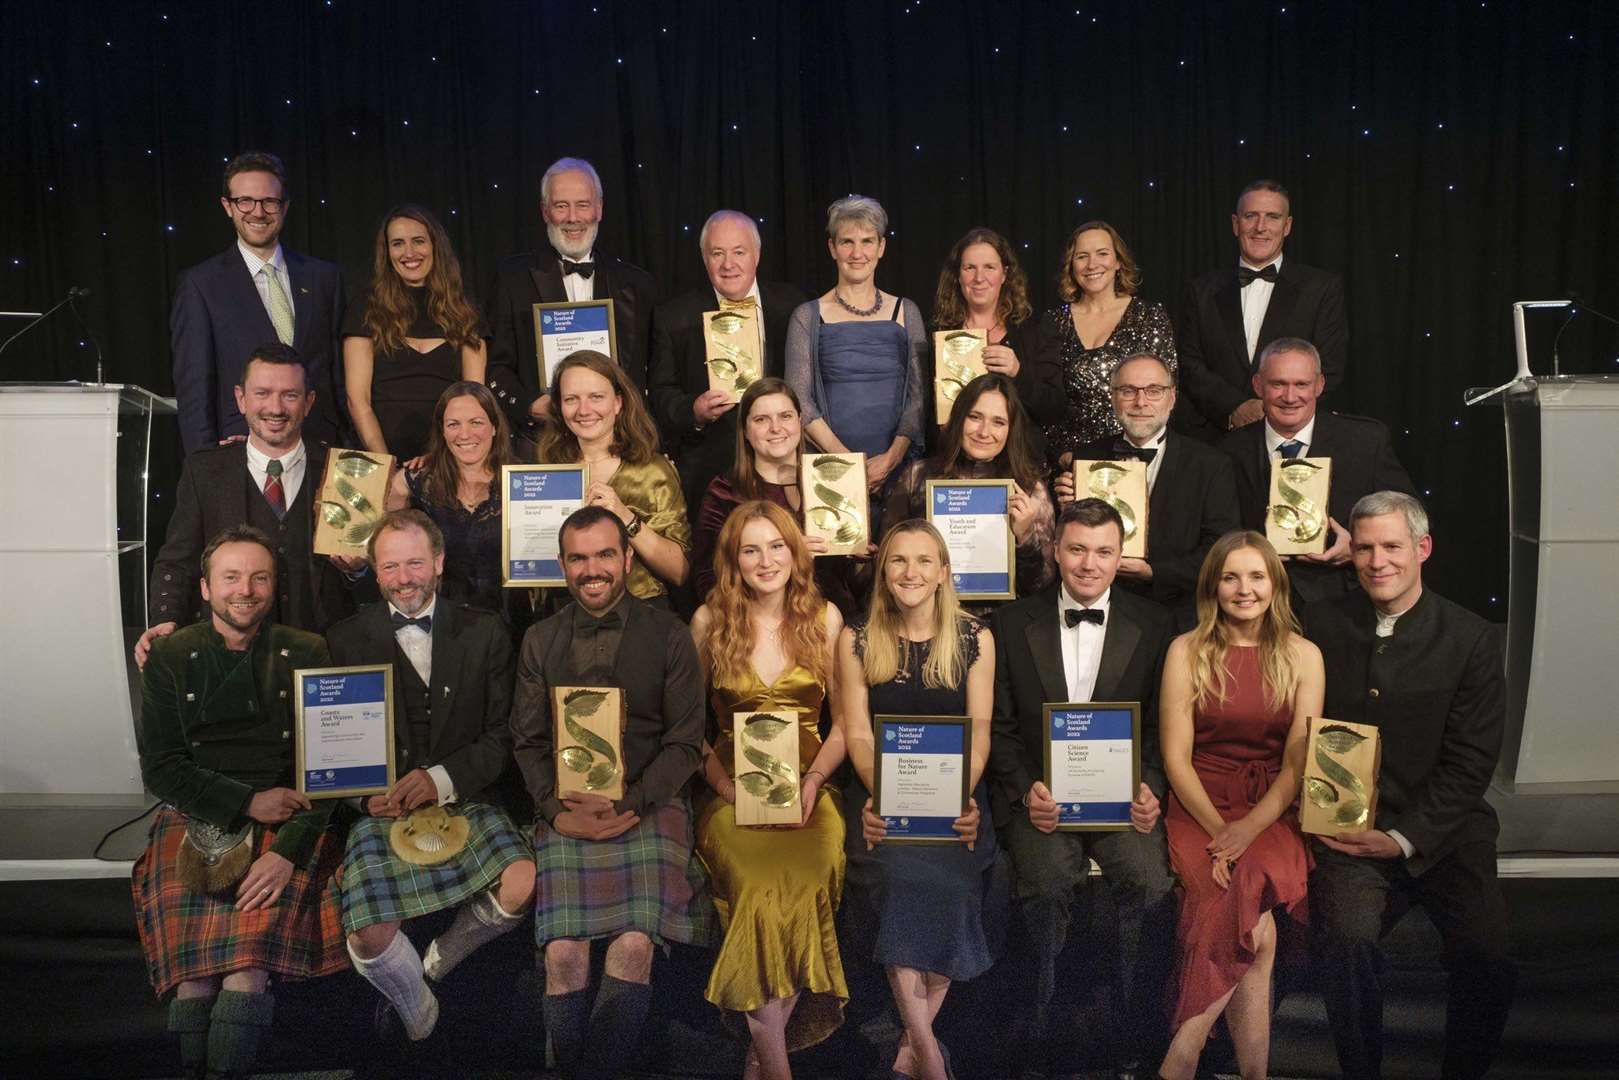 The overall winners at the RSPB awards